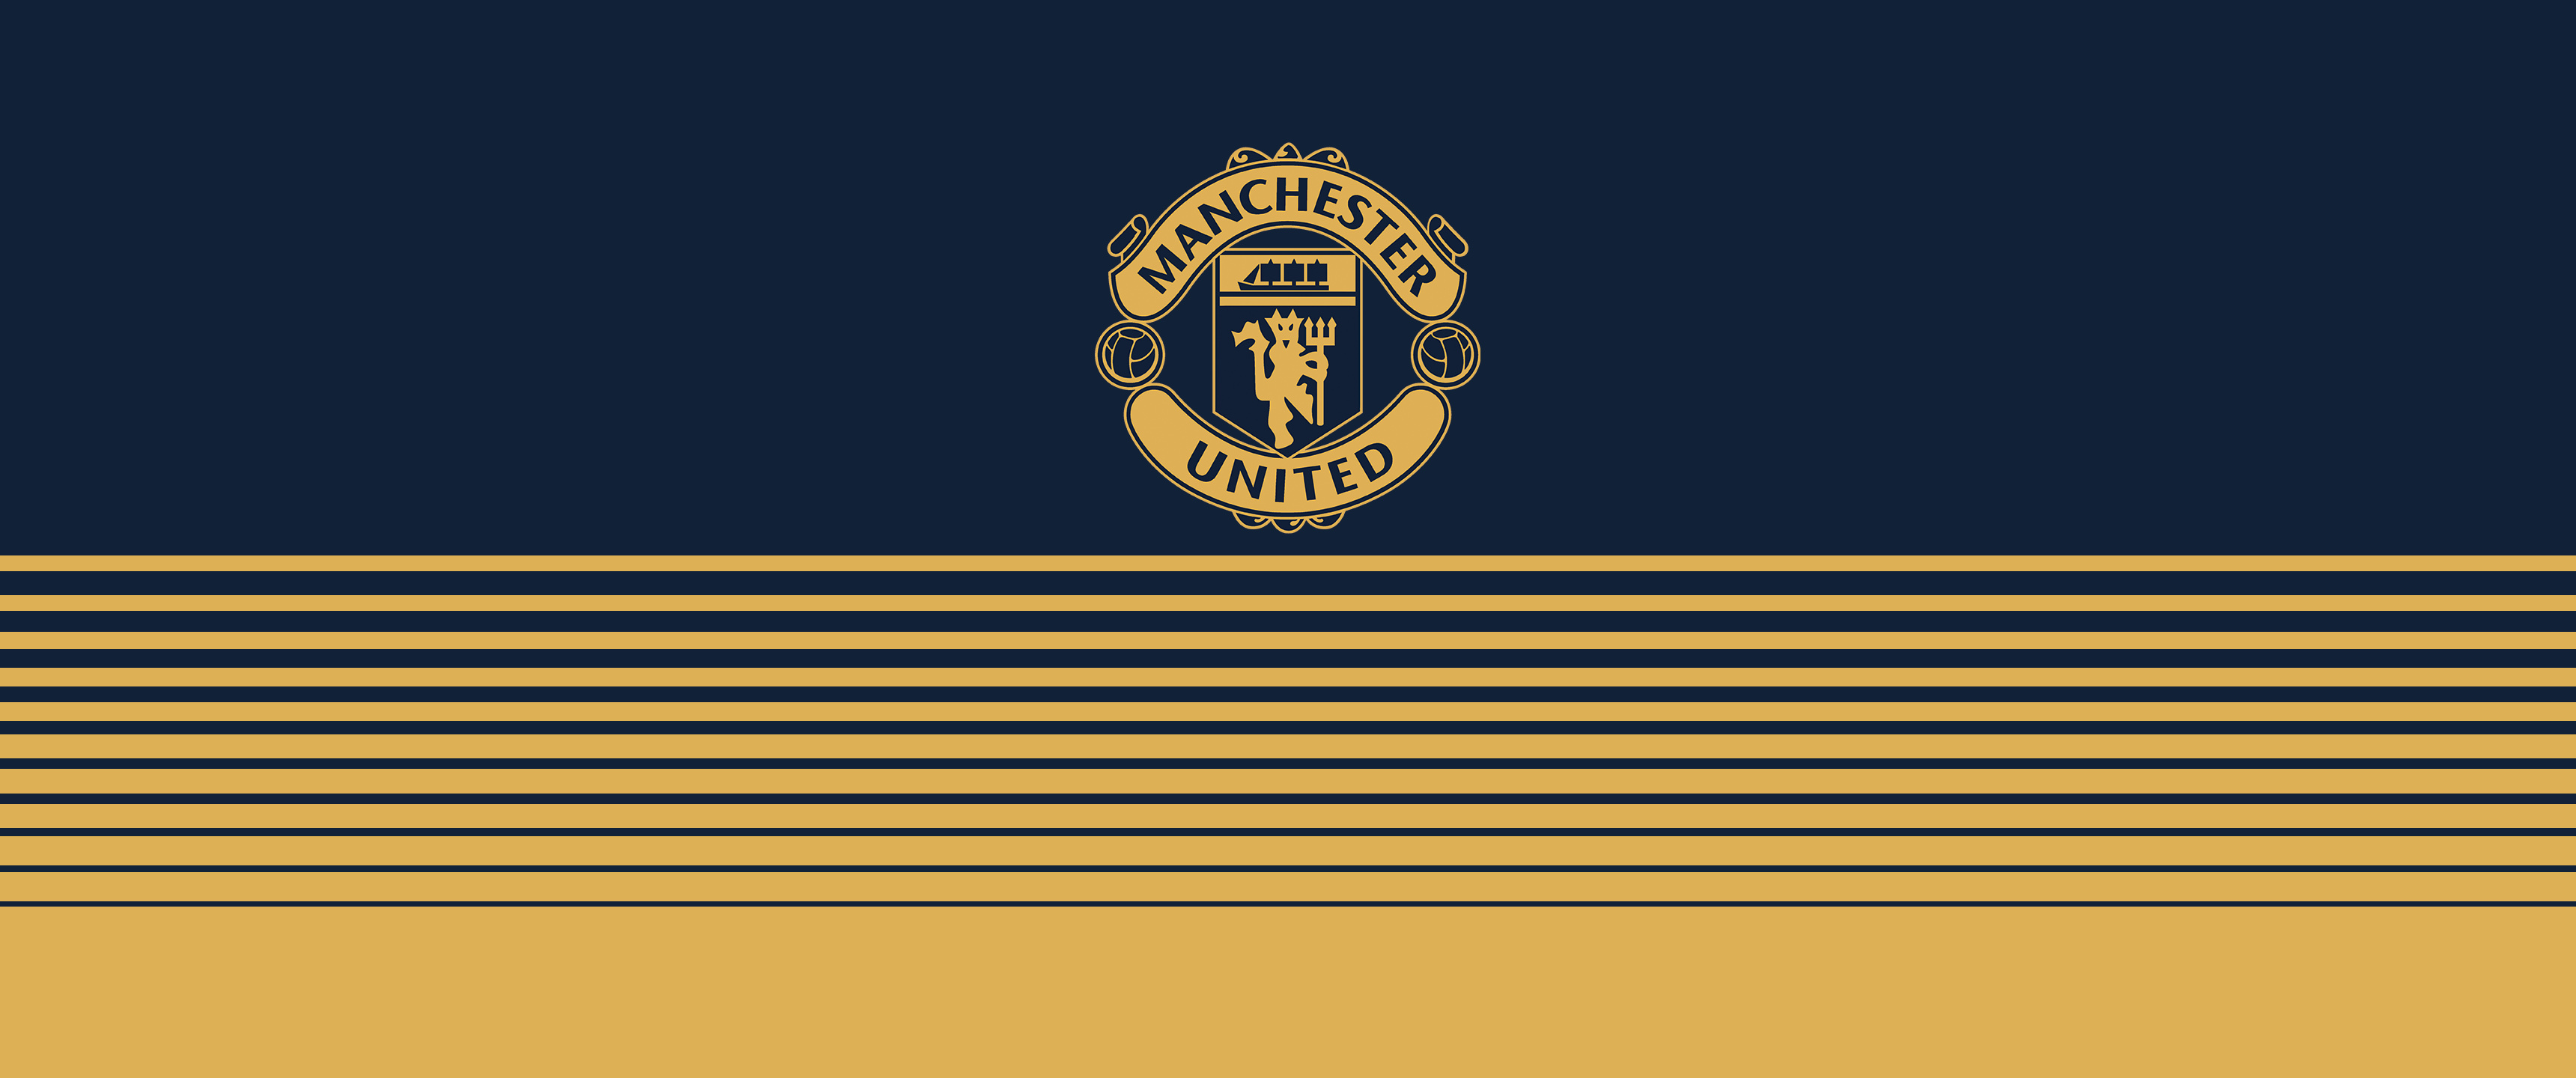 Manchester United wallpapers, Red Devils, Football club, Sports theme, 3440x1440 Dual Screen Desktop